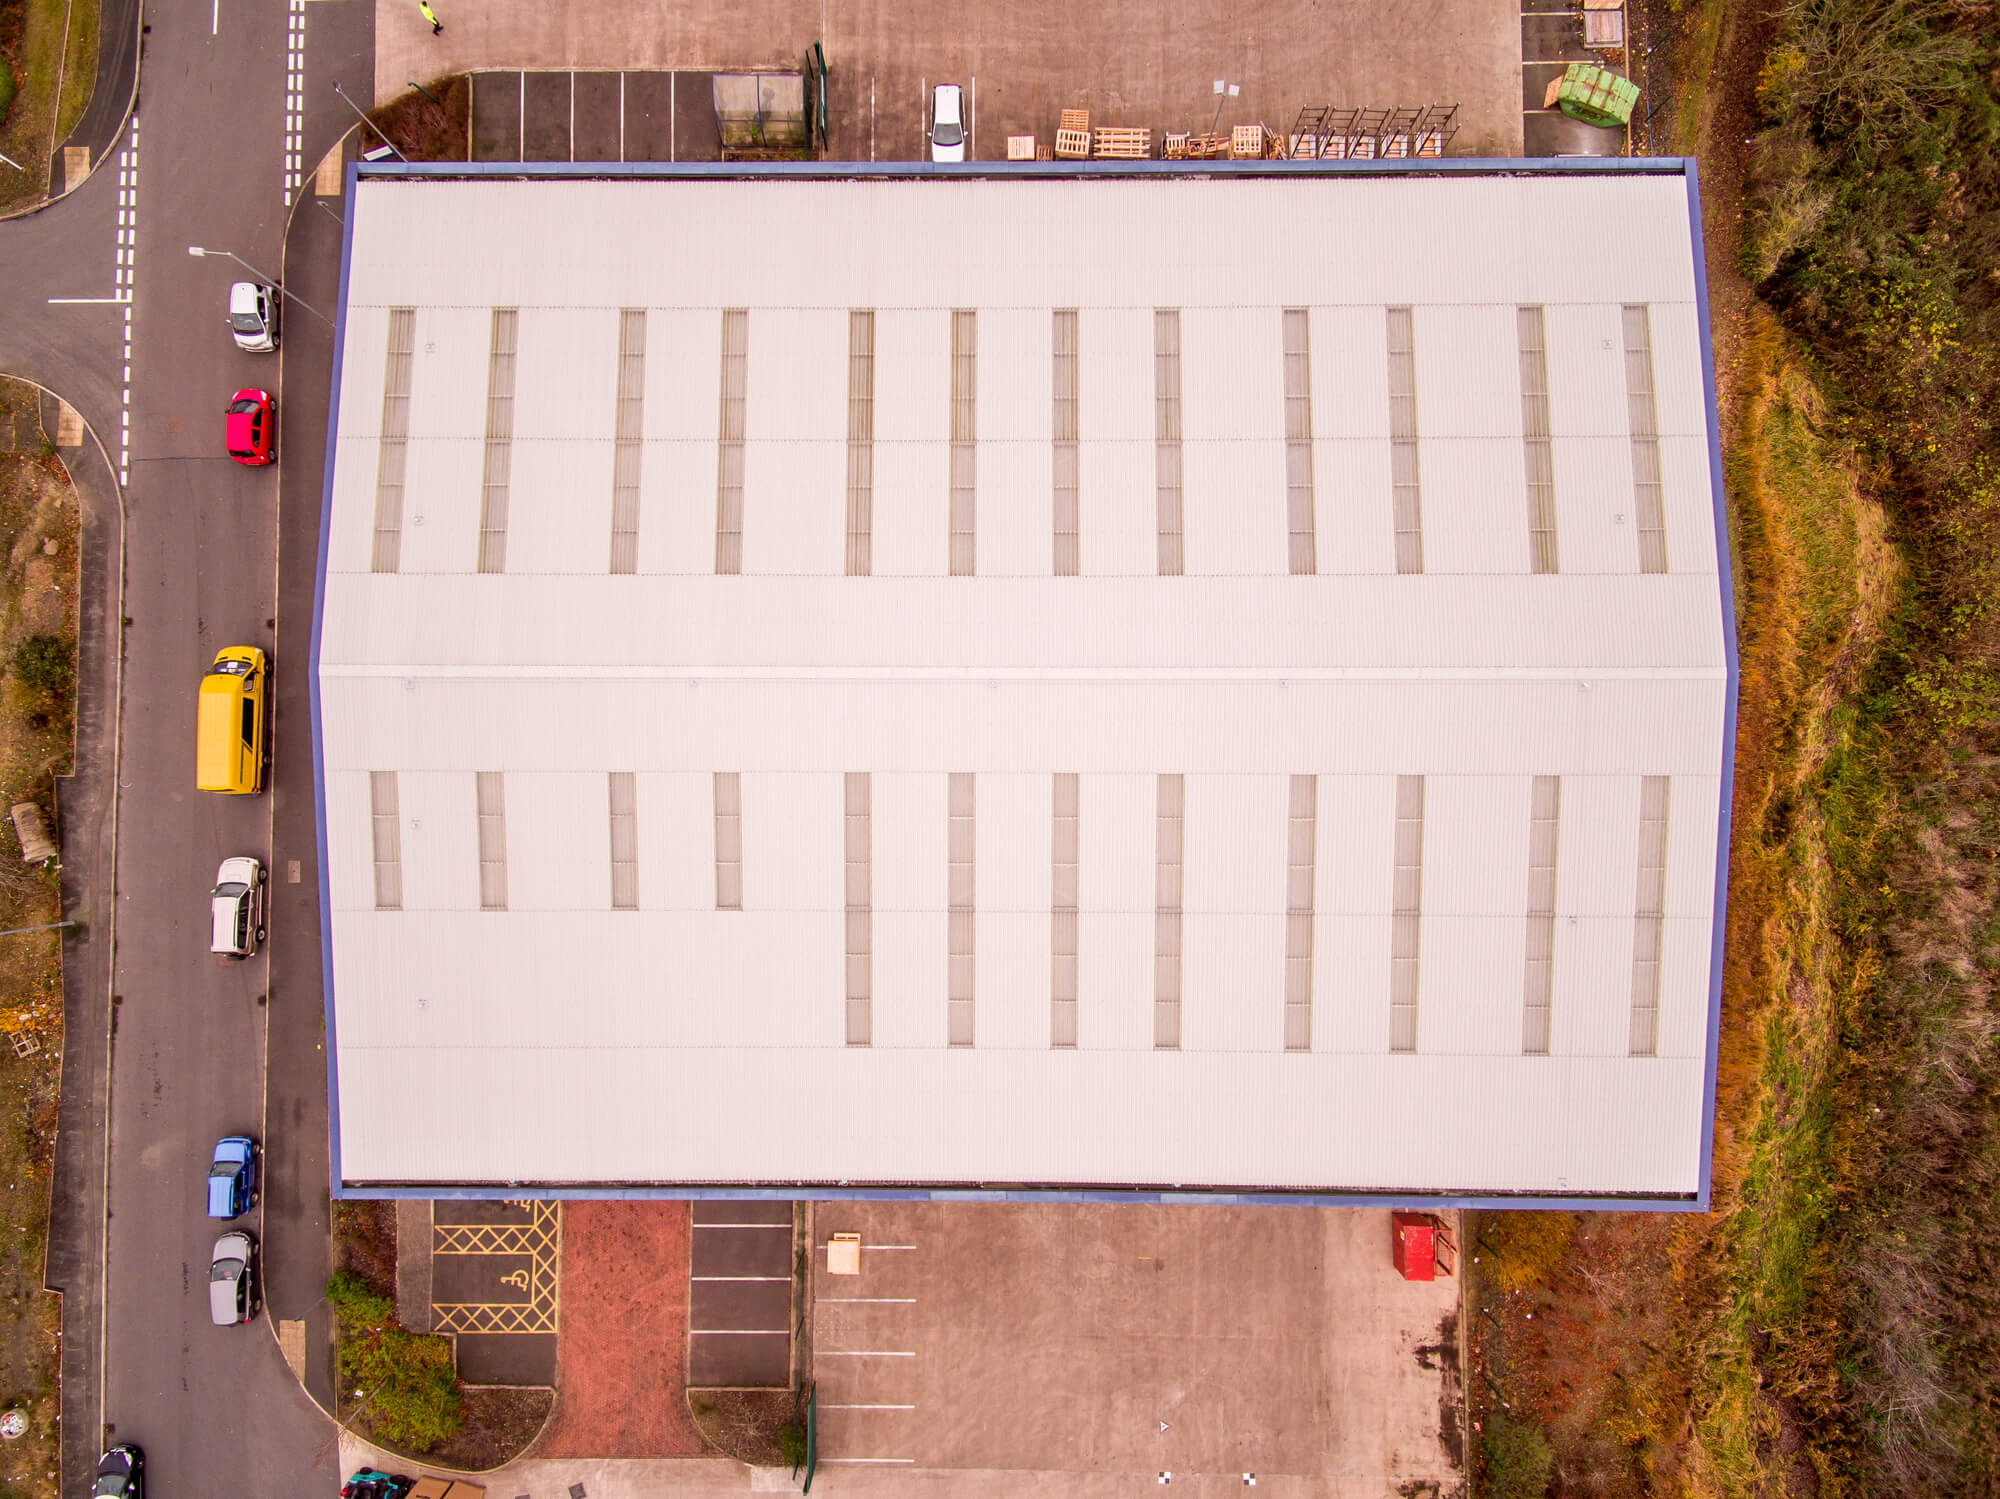 Roof inspection image of industrial building, taken by drone